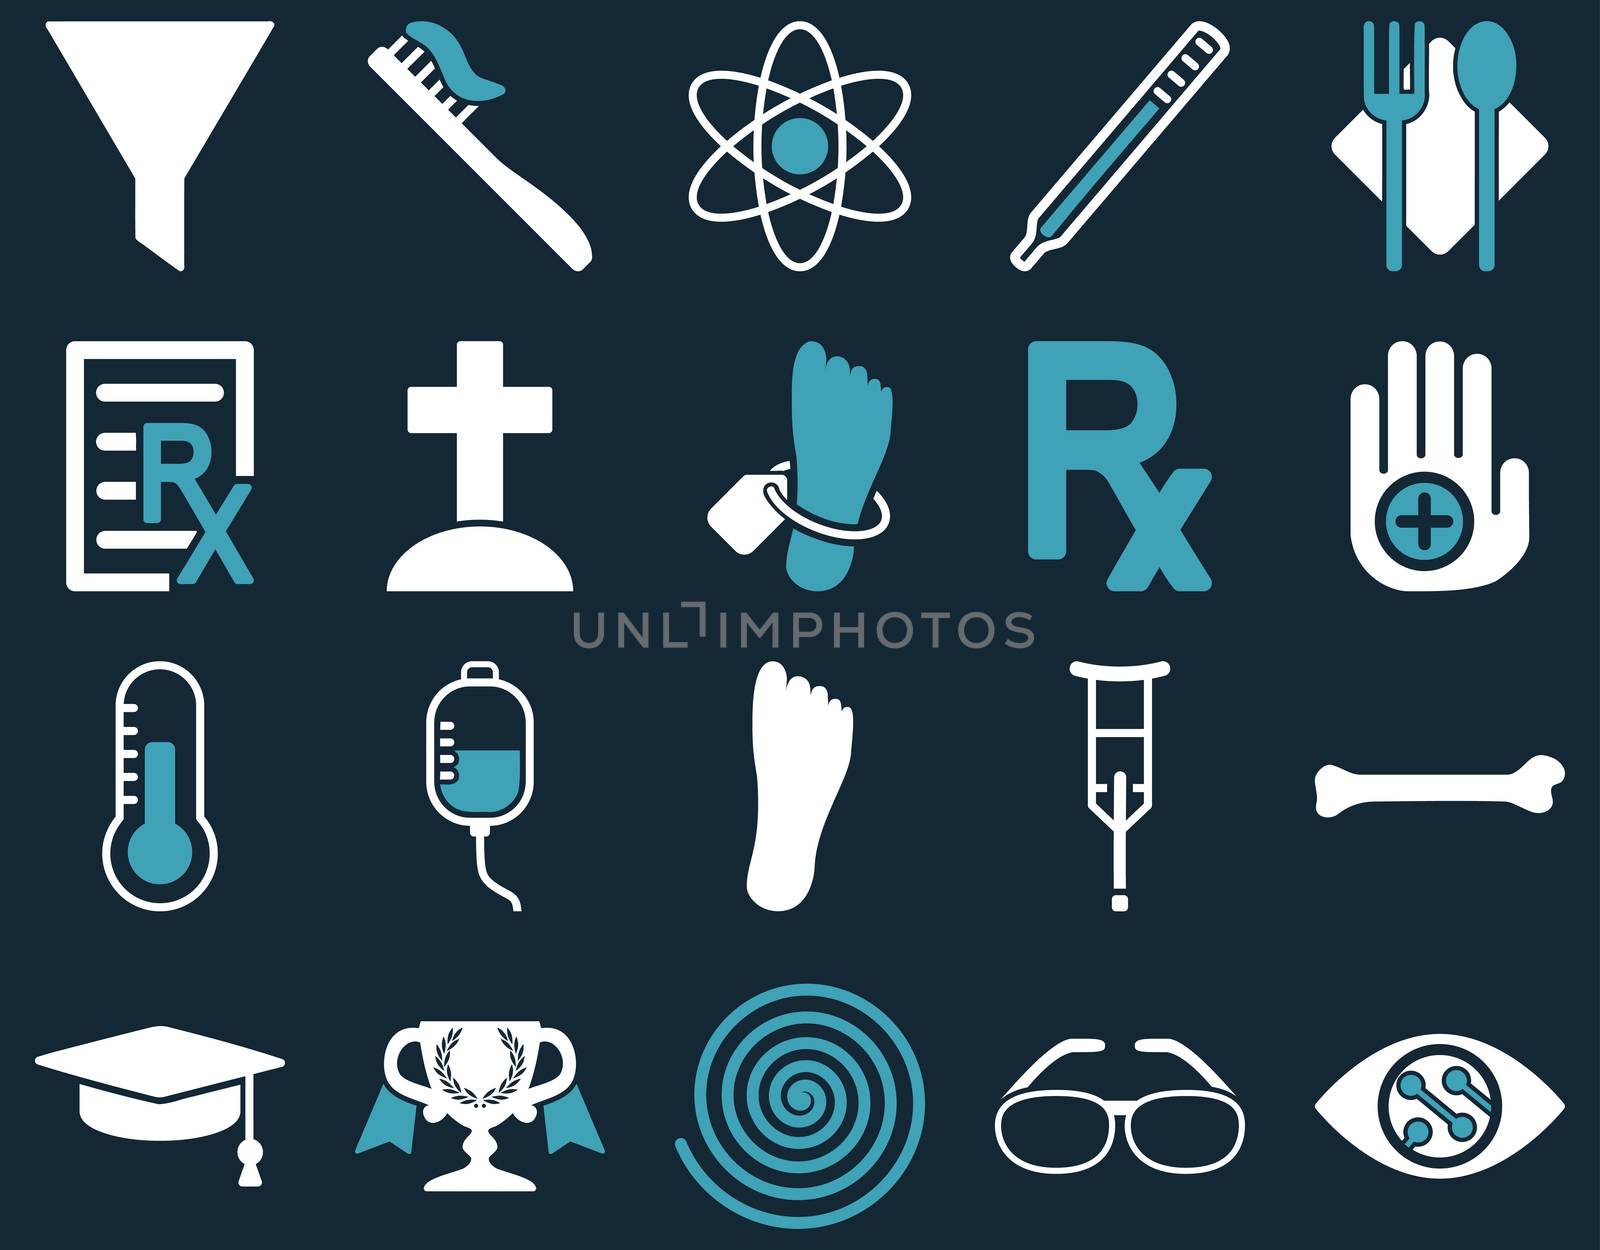 Medical icon set. Style: bicolor icons drawn with blue and white colors on a dark blue background.